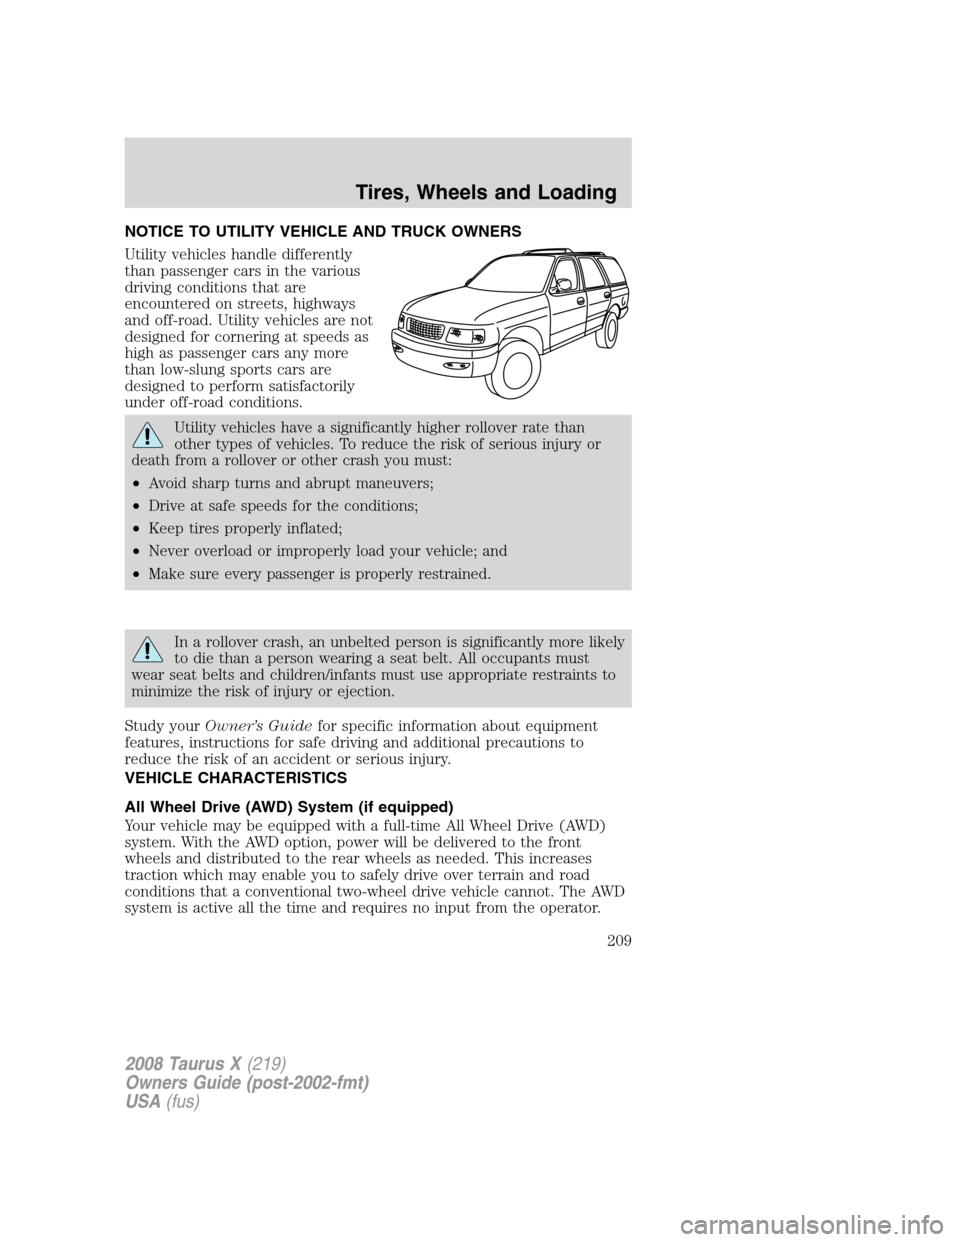 FORD TAURUS X 2008 1.G Owners Manual NOTICE TO UTILITY VEHICLE AND TRUCK OWNERS
Utility vehicles handle differently
than passenger cars in the various
driving conditions that are
encountered on streets, highways
and off-road. Utility veh